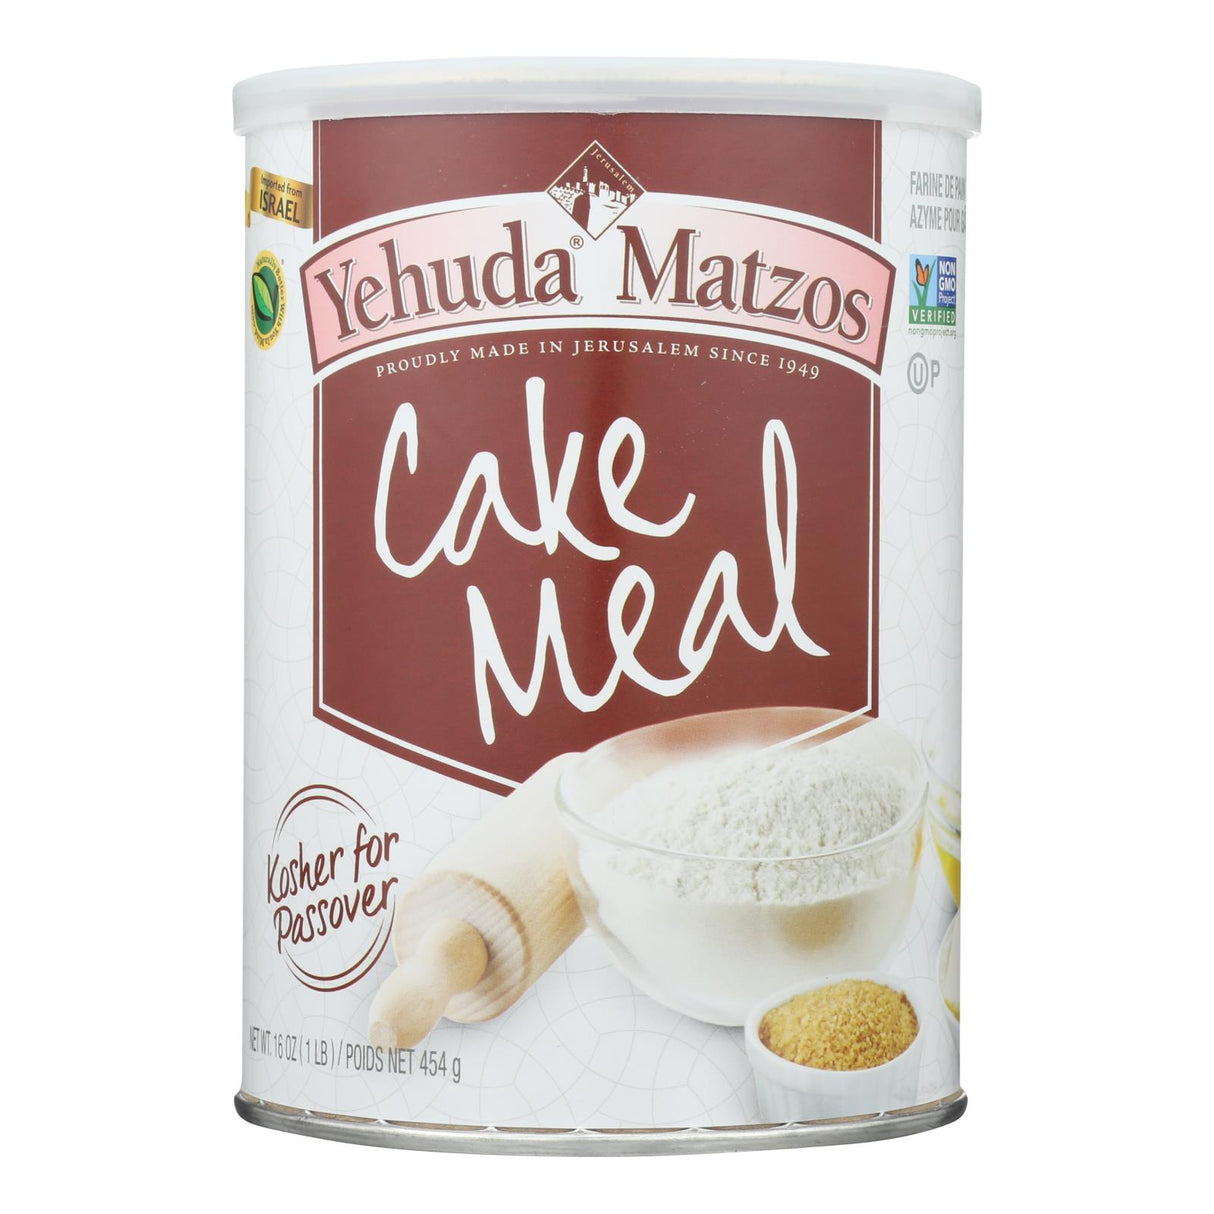 Yehuda Kosher For Passover Cake Meal Canister - 16 Oz Case of 12 - Cozy Farm 